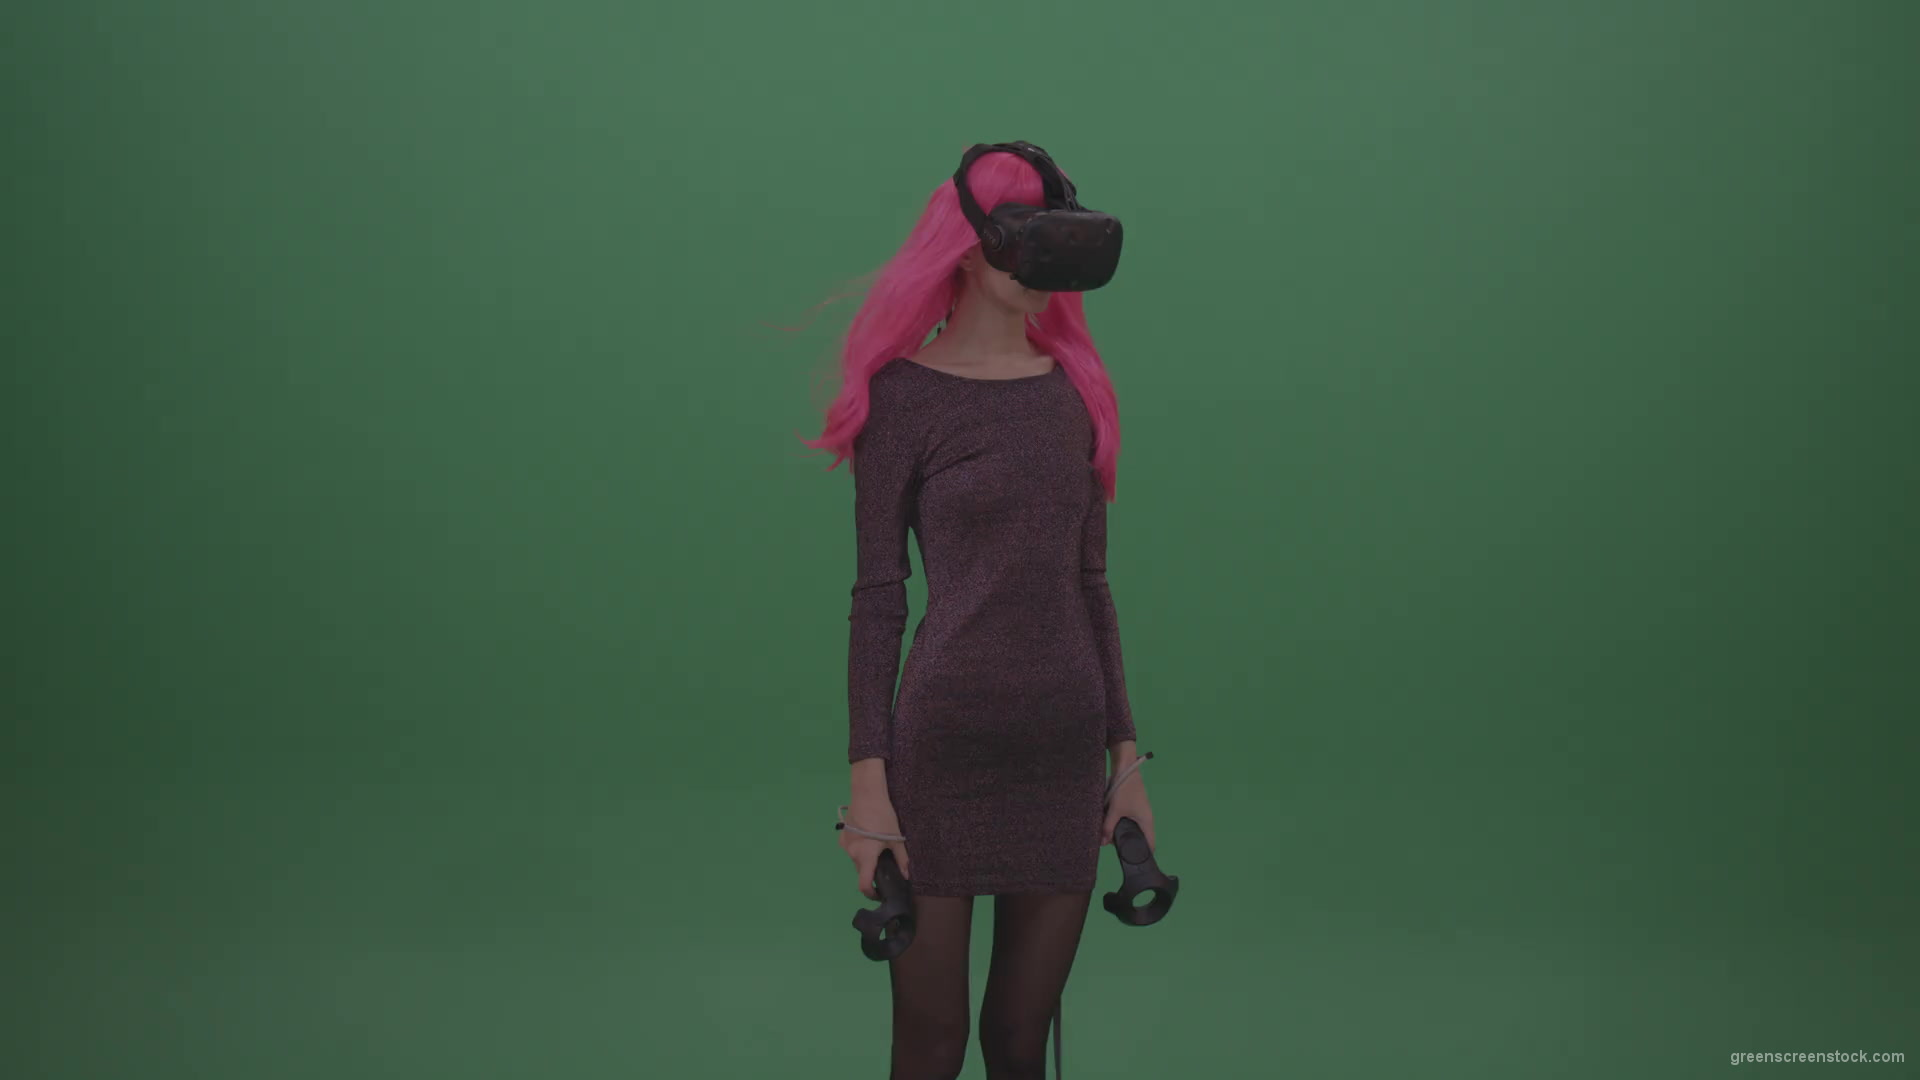 Pink_Hair_Young_Japanese_Anime_Rock_Girl_Shooting_Enemies_In_Virtual_Reality_Game_Heavy_Wind_Weather_Green_Screen_Wall_Background-1920_001 Green Screen Stock